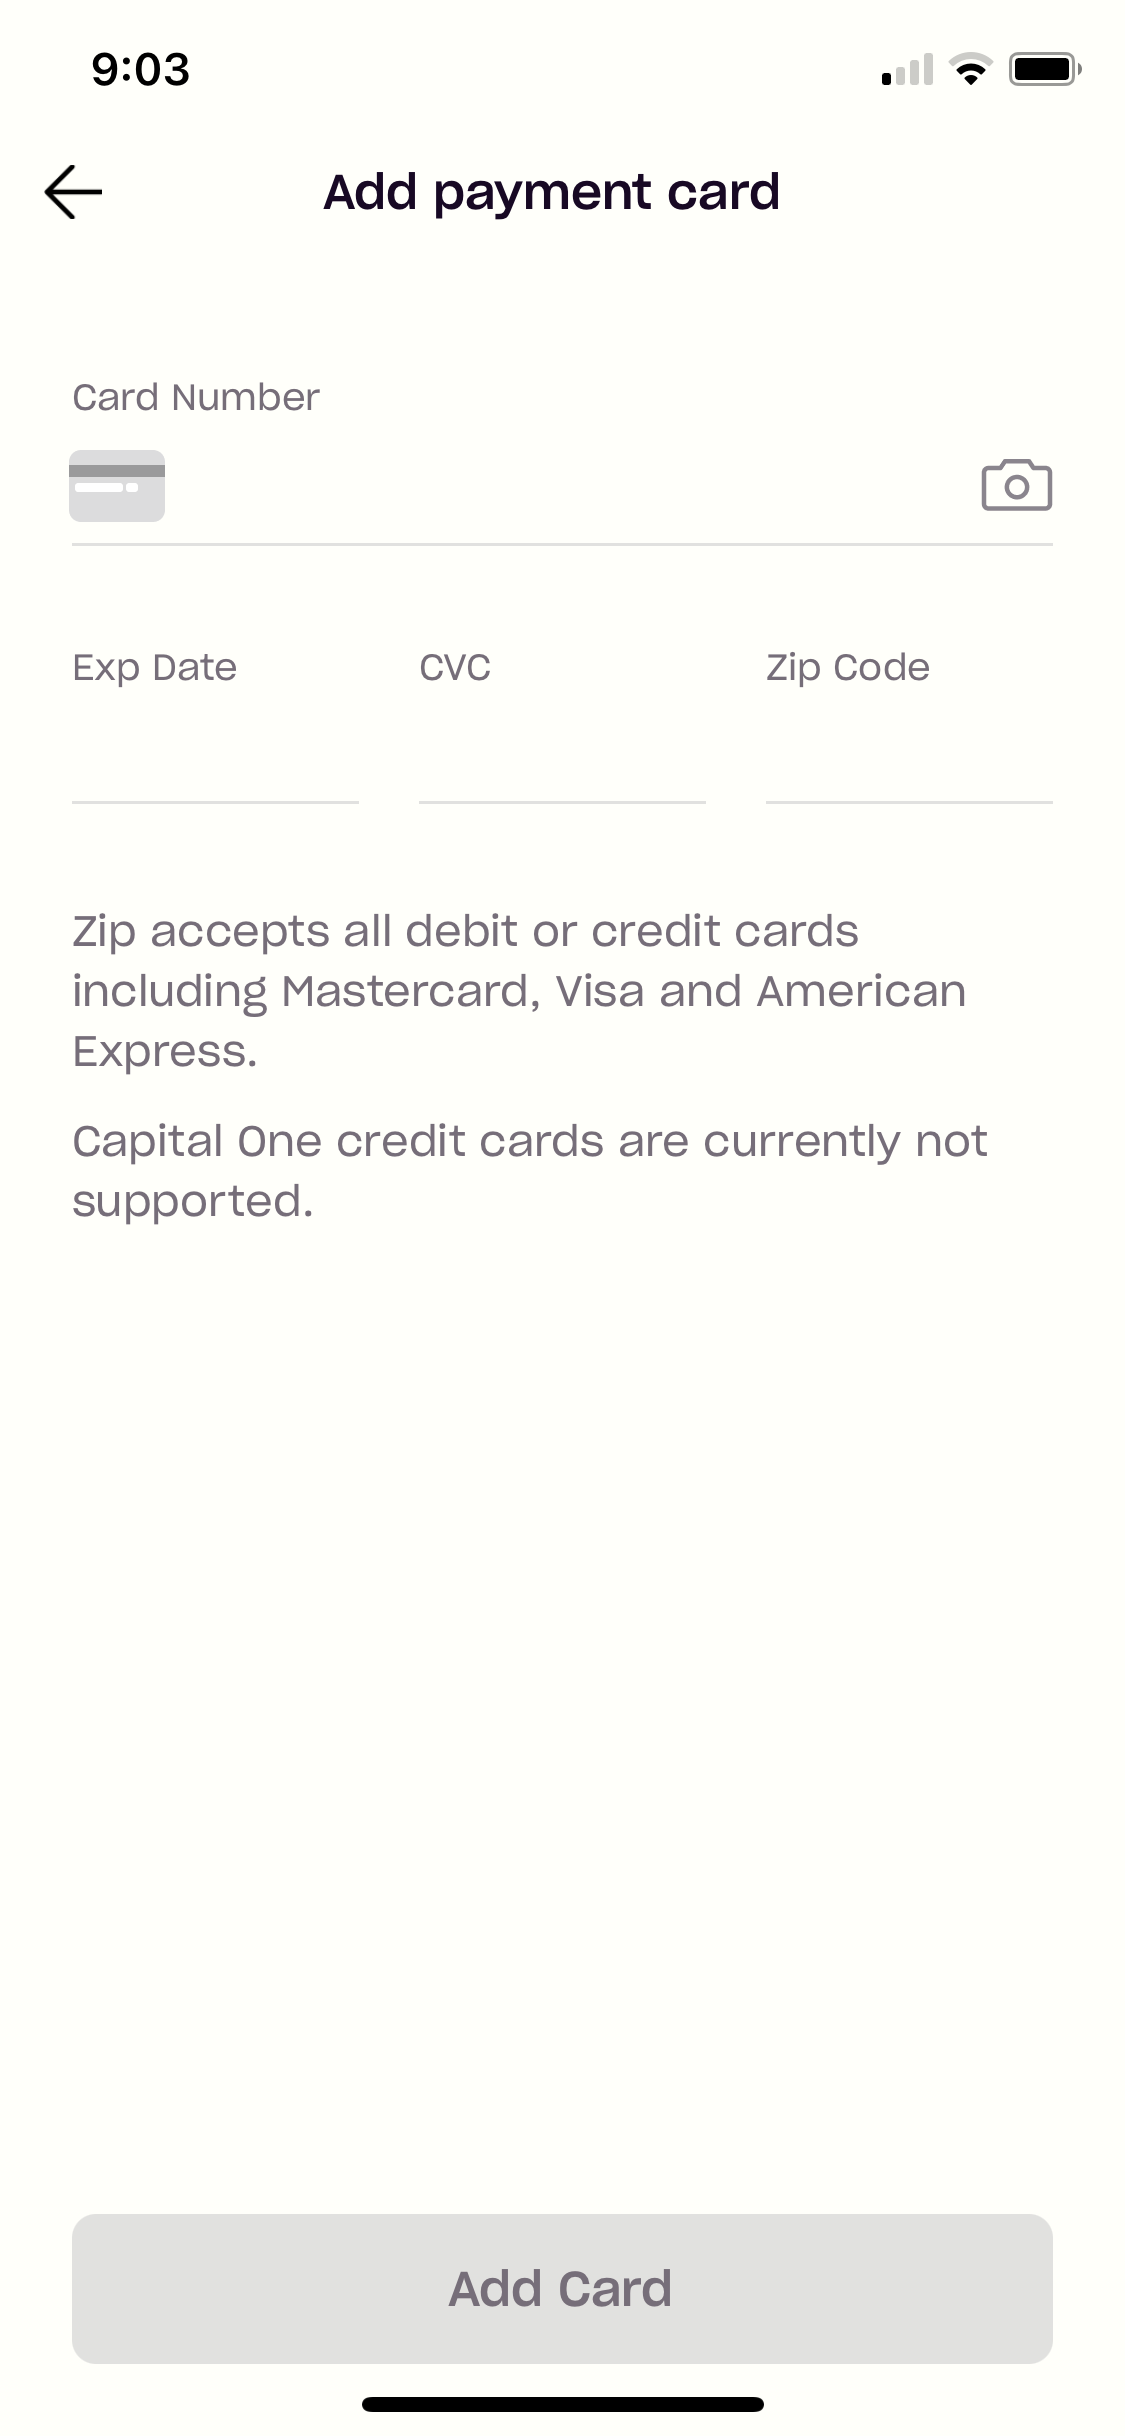 _How_do_I_add_a_new_payment_card_in_the_Zip_app_2.png